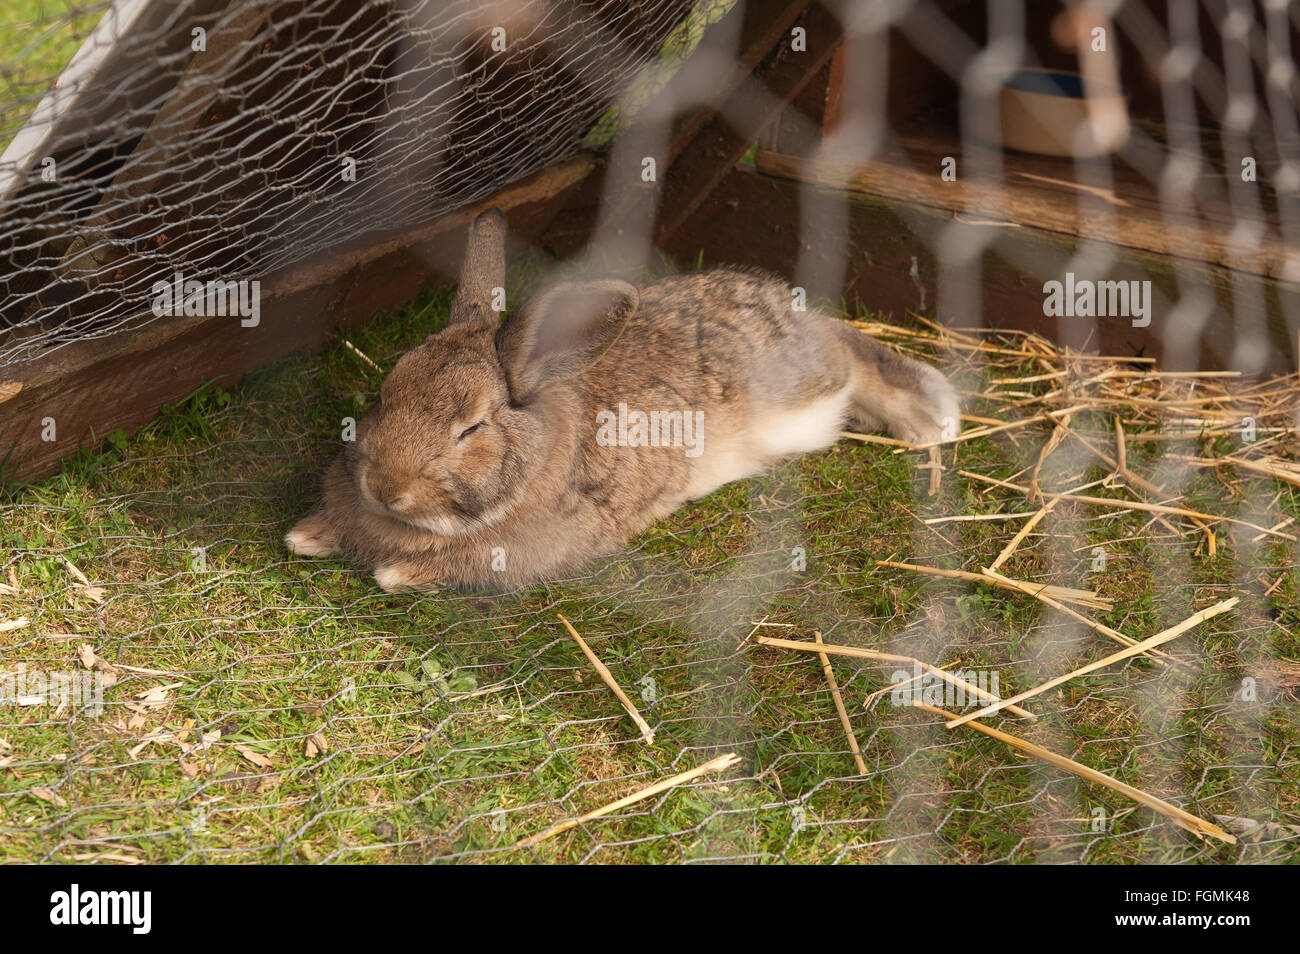 beloved home pet rabbit caged in outside run on grass with chicken wire to protect from foxes on lawn and grass Stock Photo